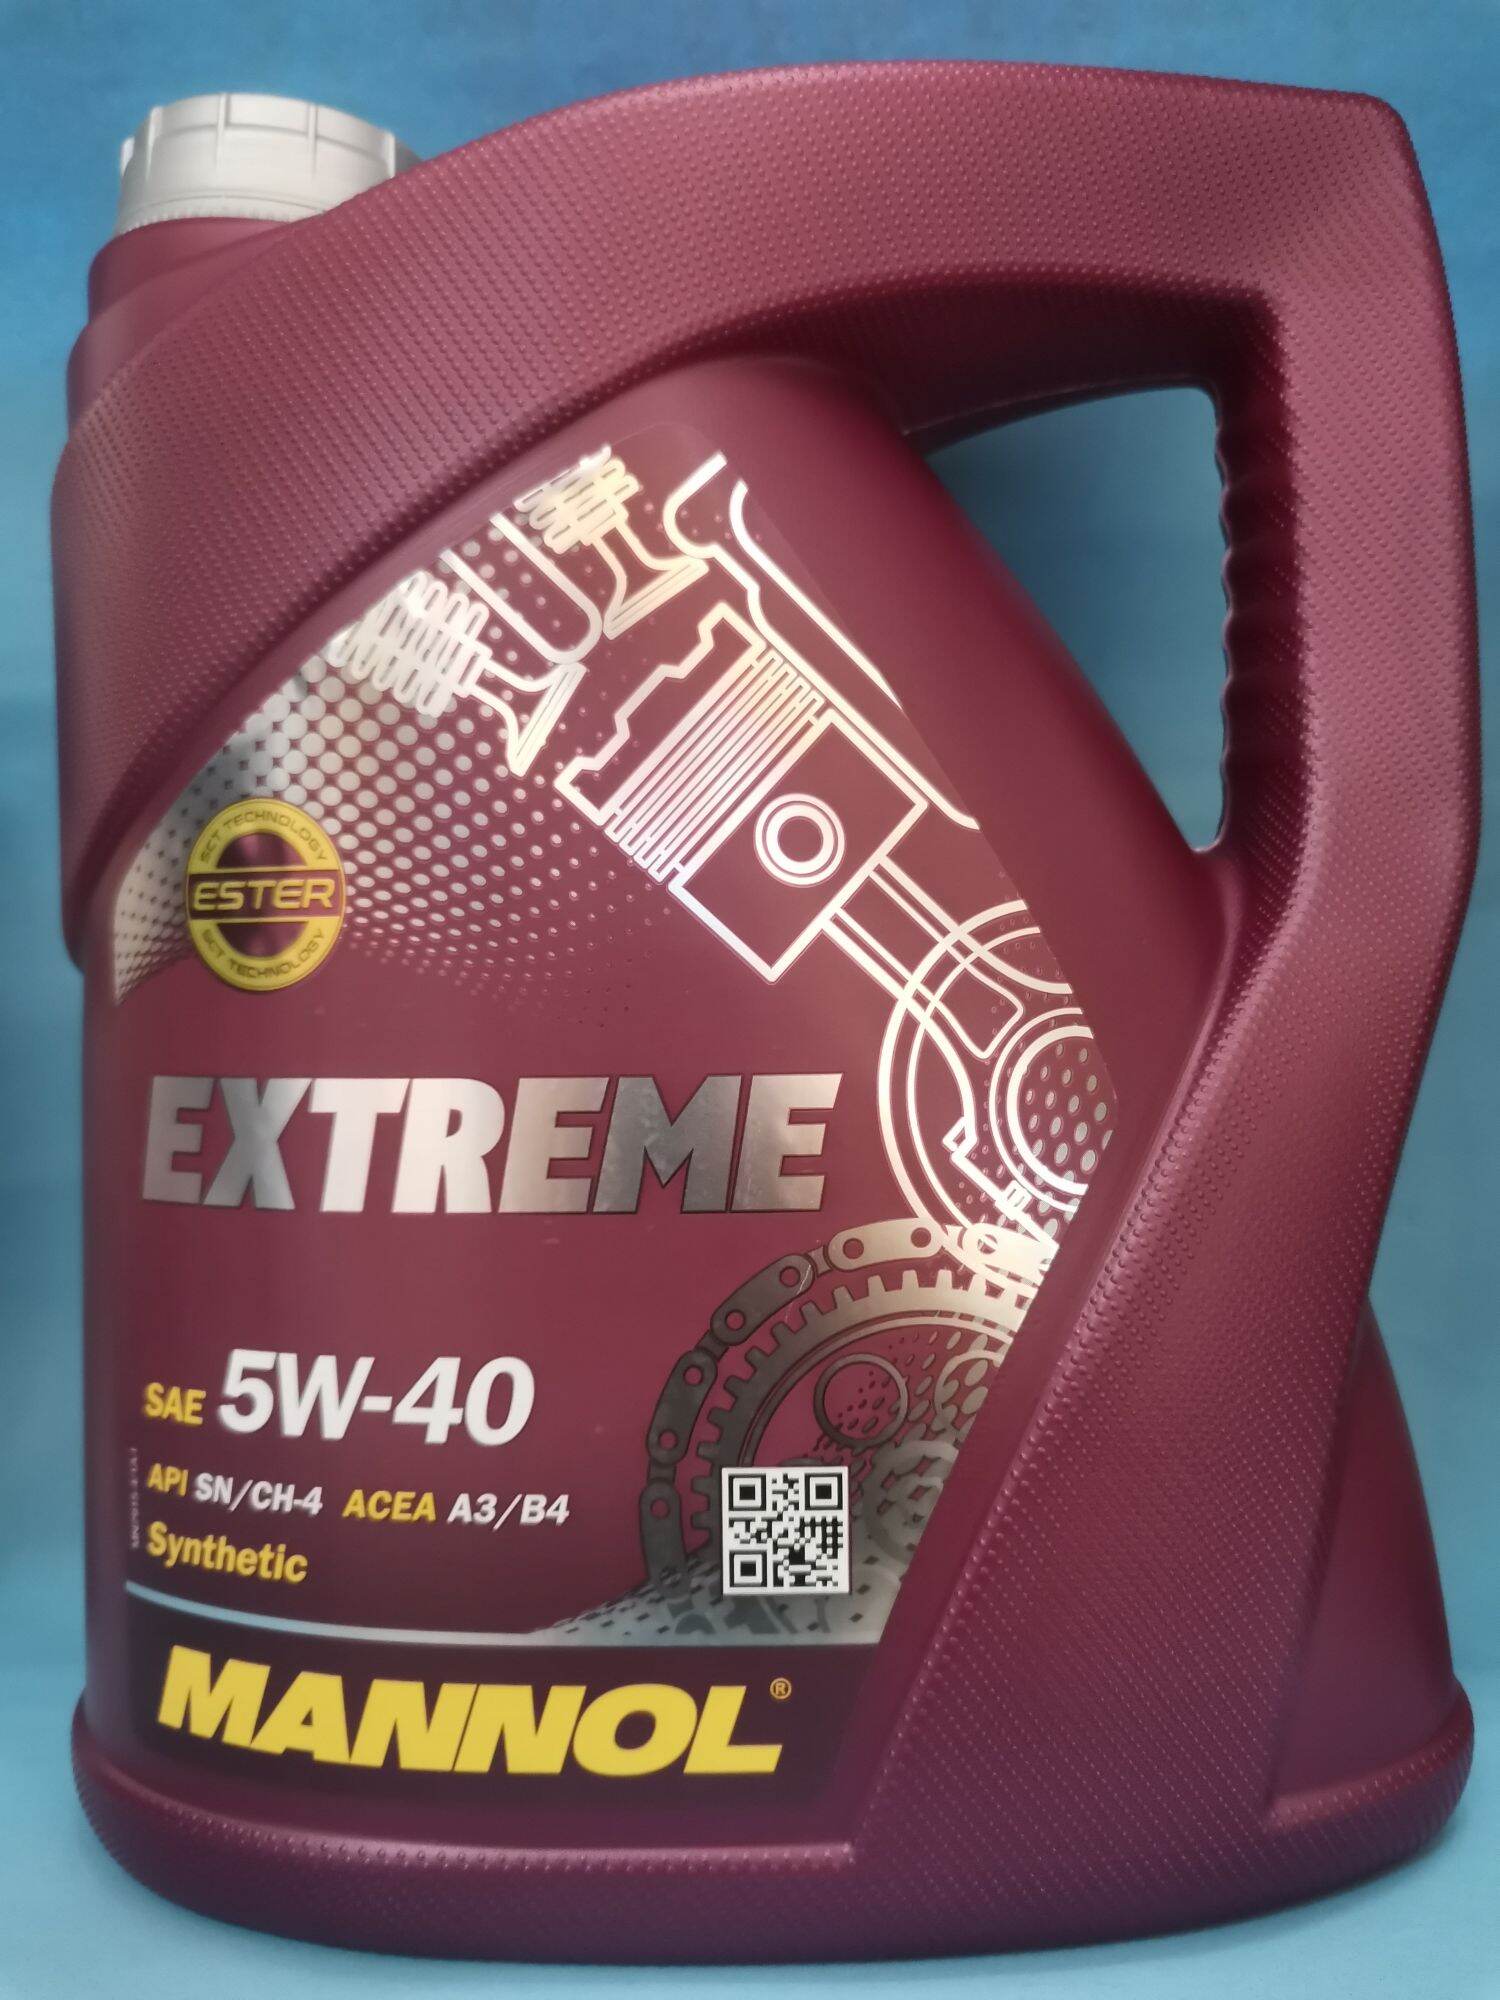 MANNOL EXTREME 5W40 (7915)*5L*ACEA A3/B4* API SN/CH-4* FULLY SYNTHETIC OIL